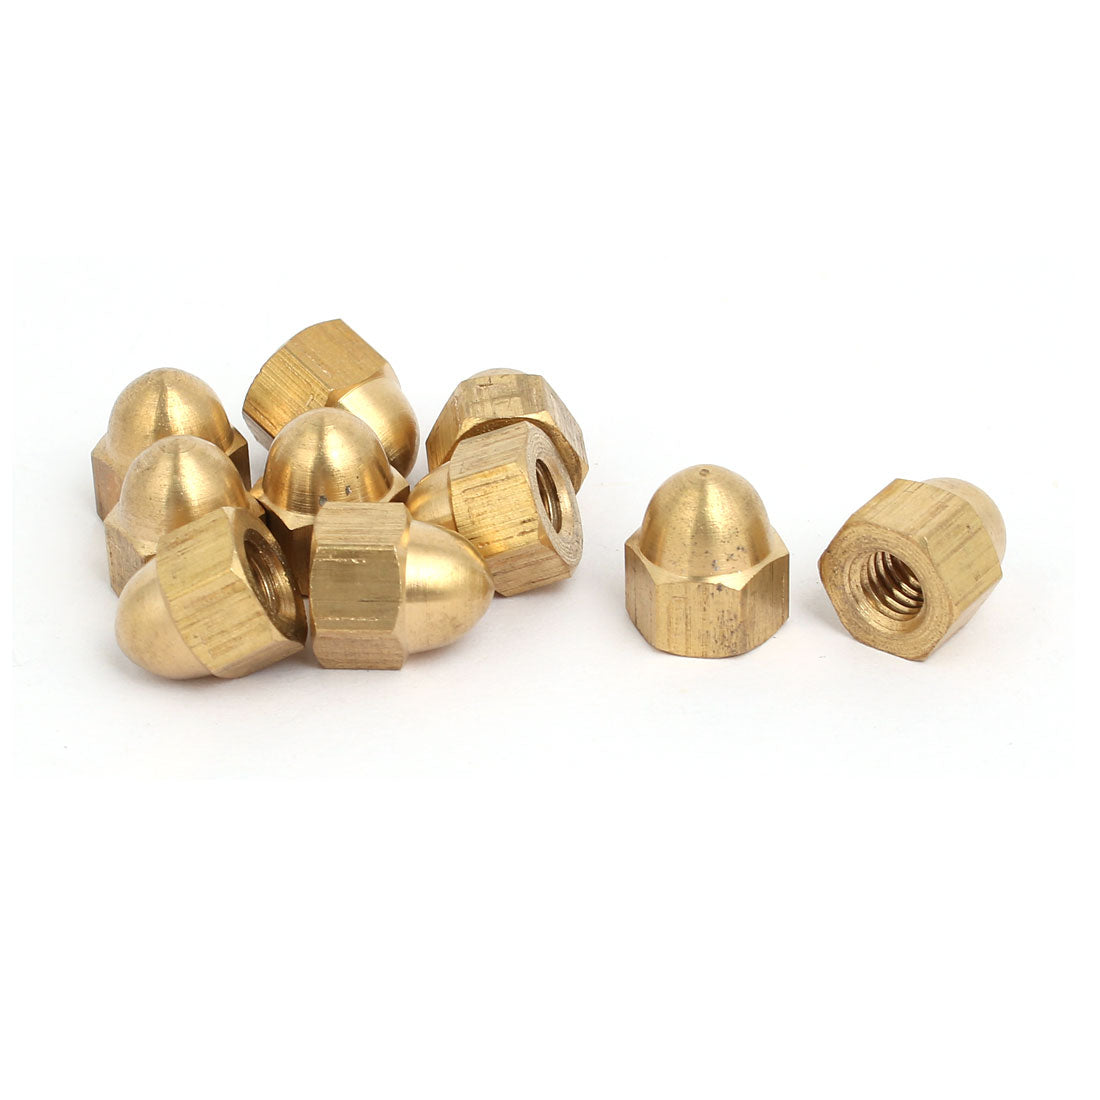 uxcell Uxcell 10pcs M6 Female Thread Nut DIN1587 Dome Cap Head Hex Brass Tone